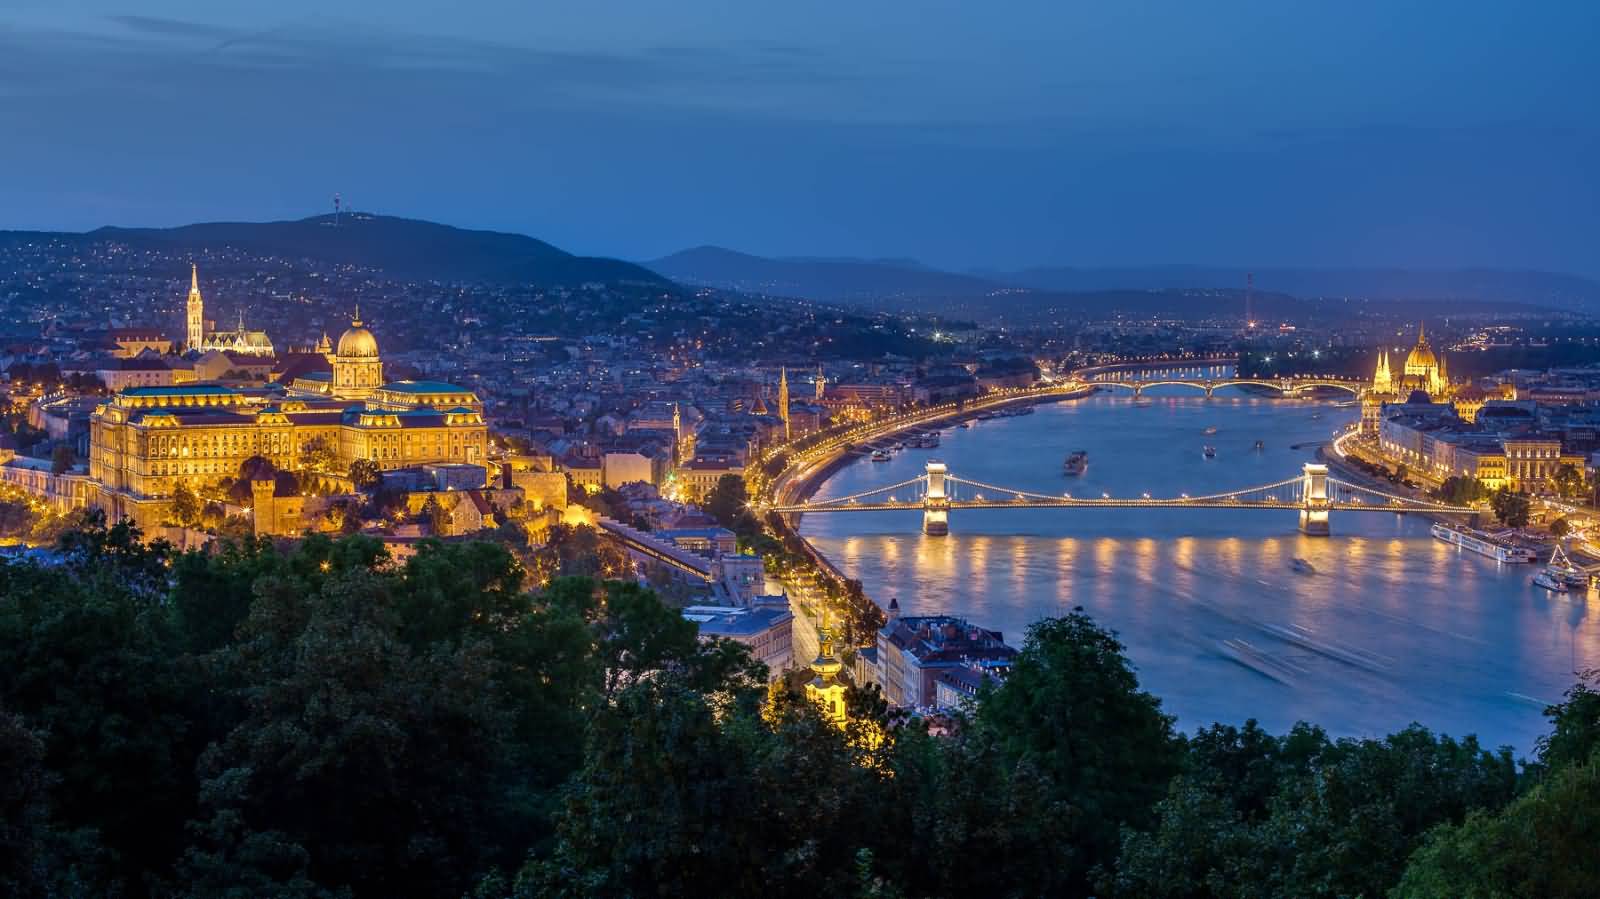 Buda Castle And Chain Bridge Panorama From Gellert Hill In The Blue Hour In Budapest